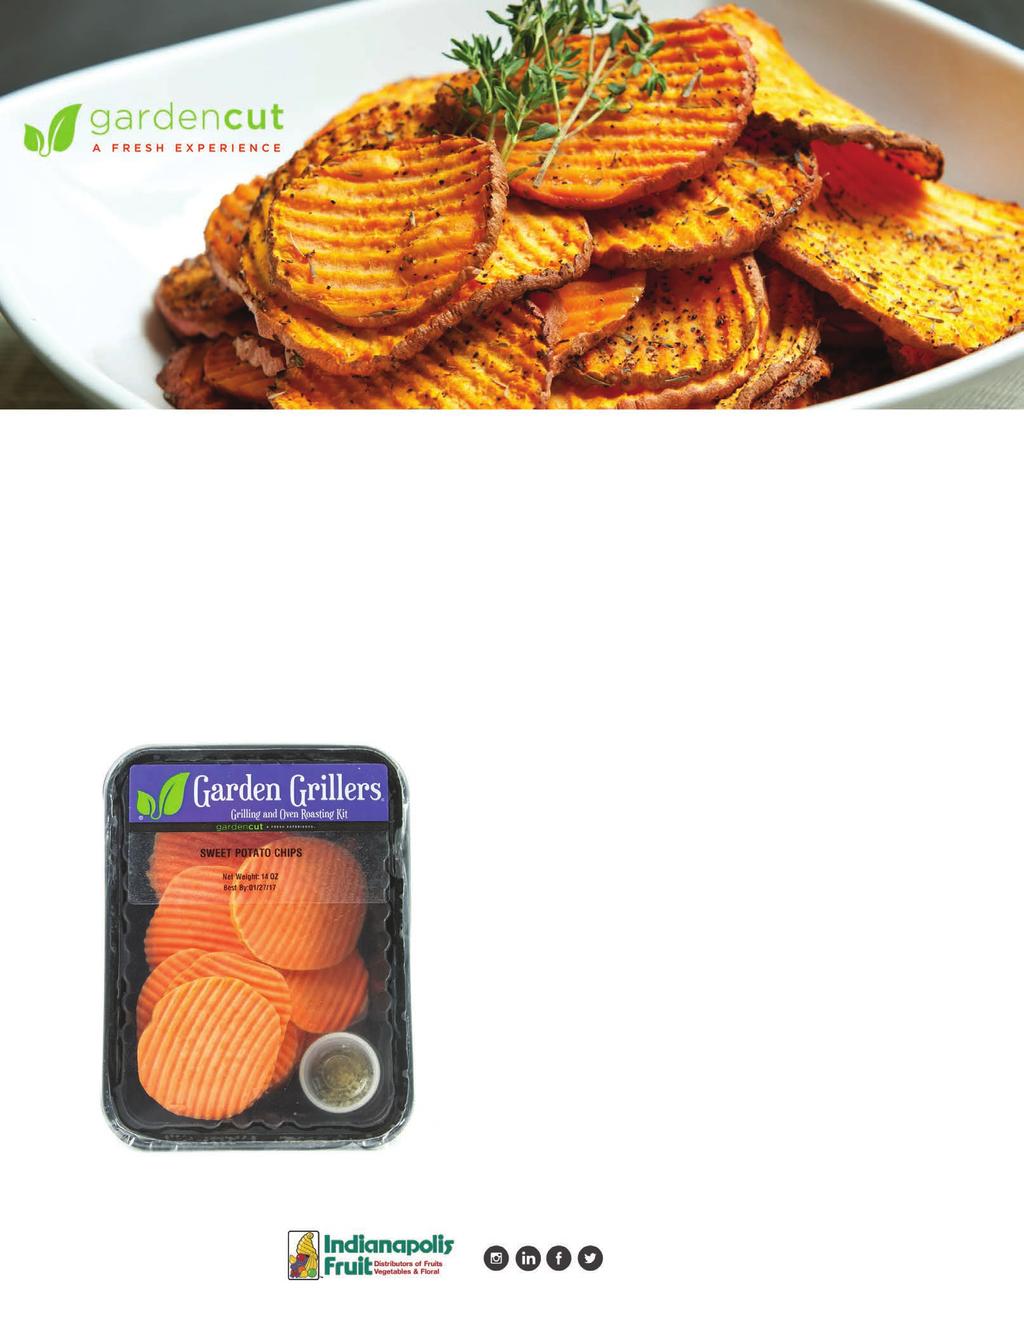 Garden Grillers Sweet Potato Chips A delicious blend of crimini mushrooms, red onion, crumbled blue cheese, and spices, this conveniently packed